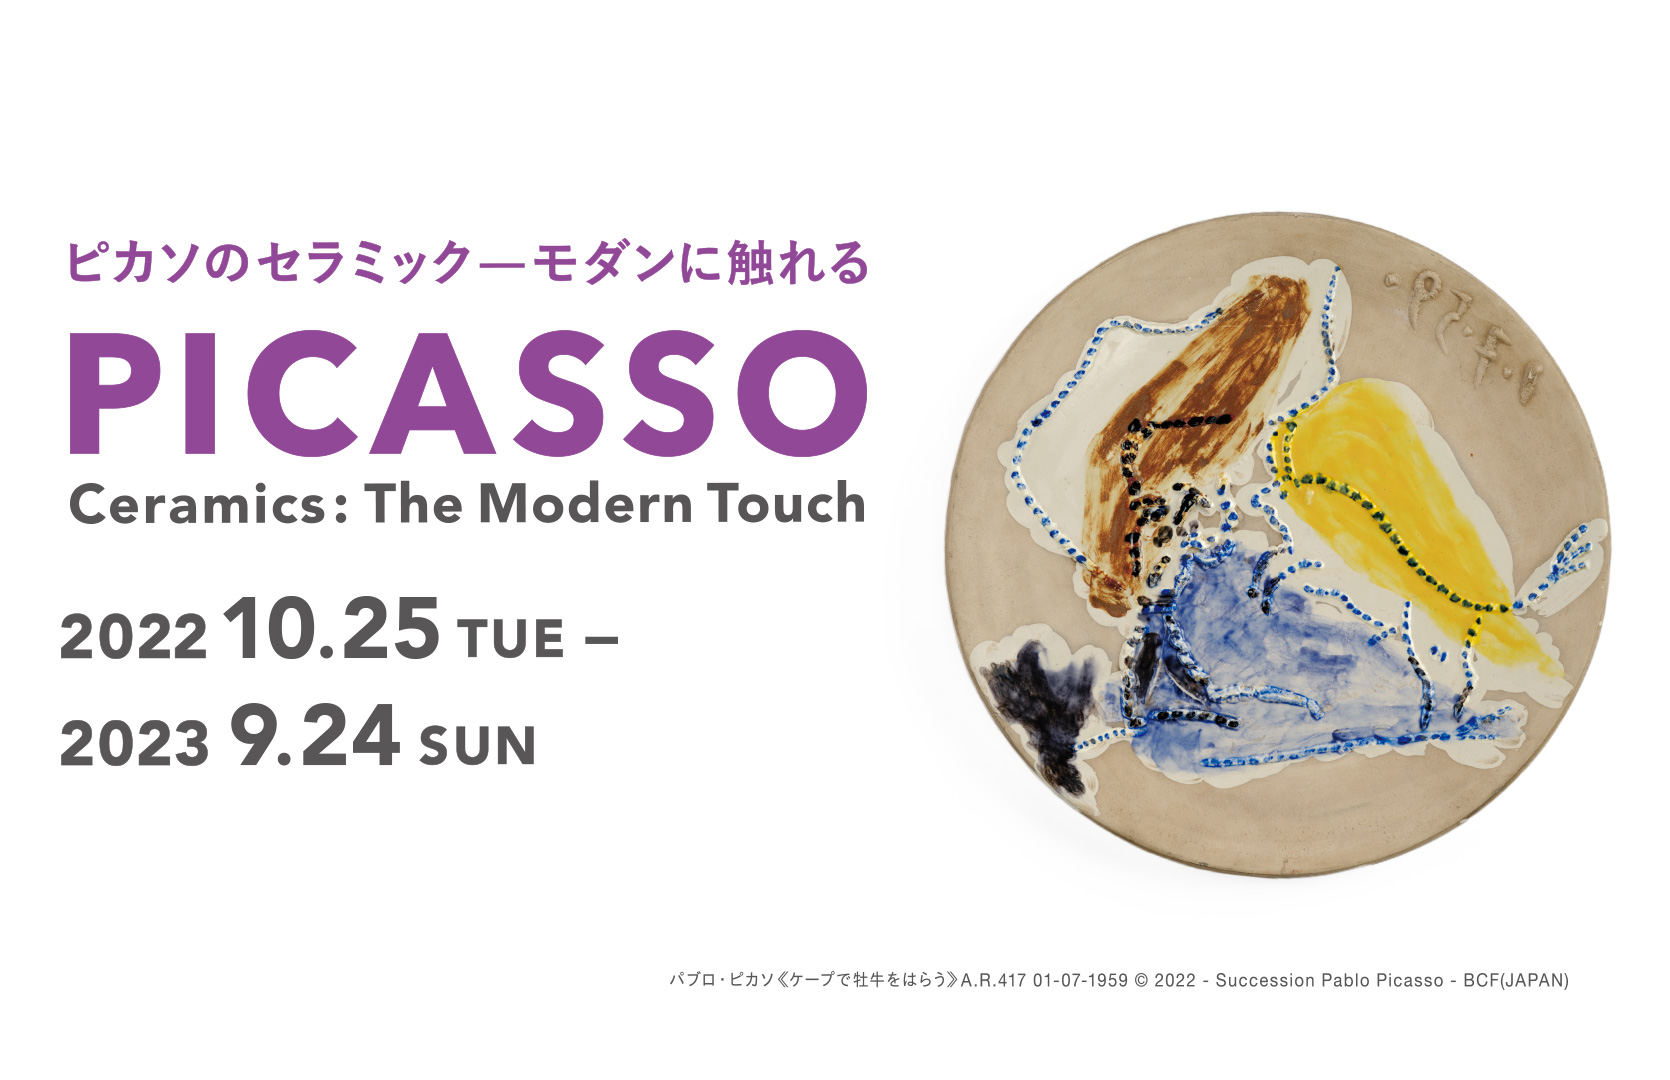 PICASSO Ceramics: The Modern Touch